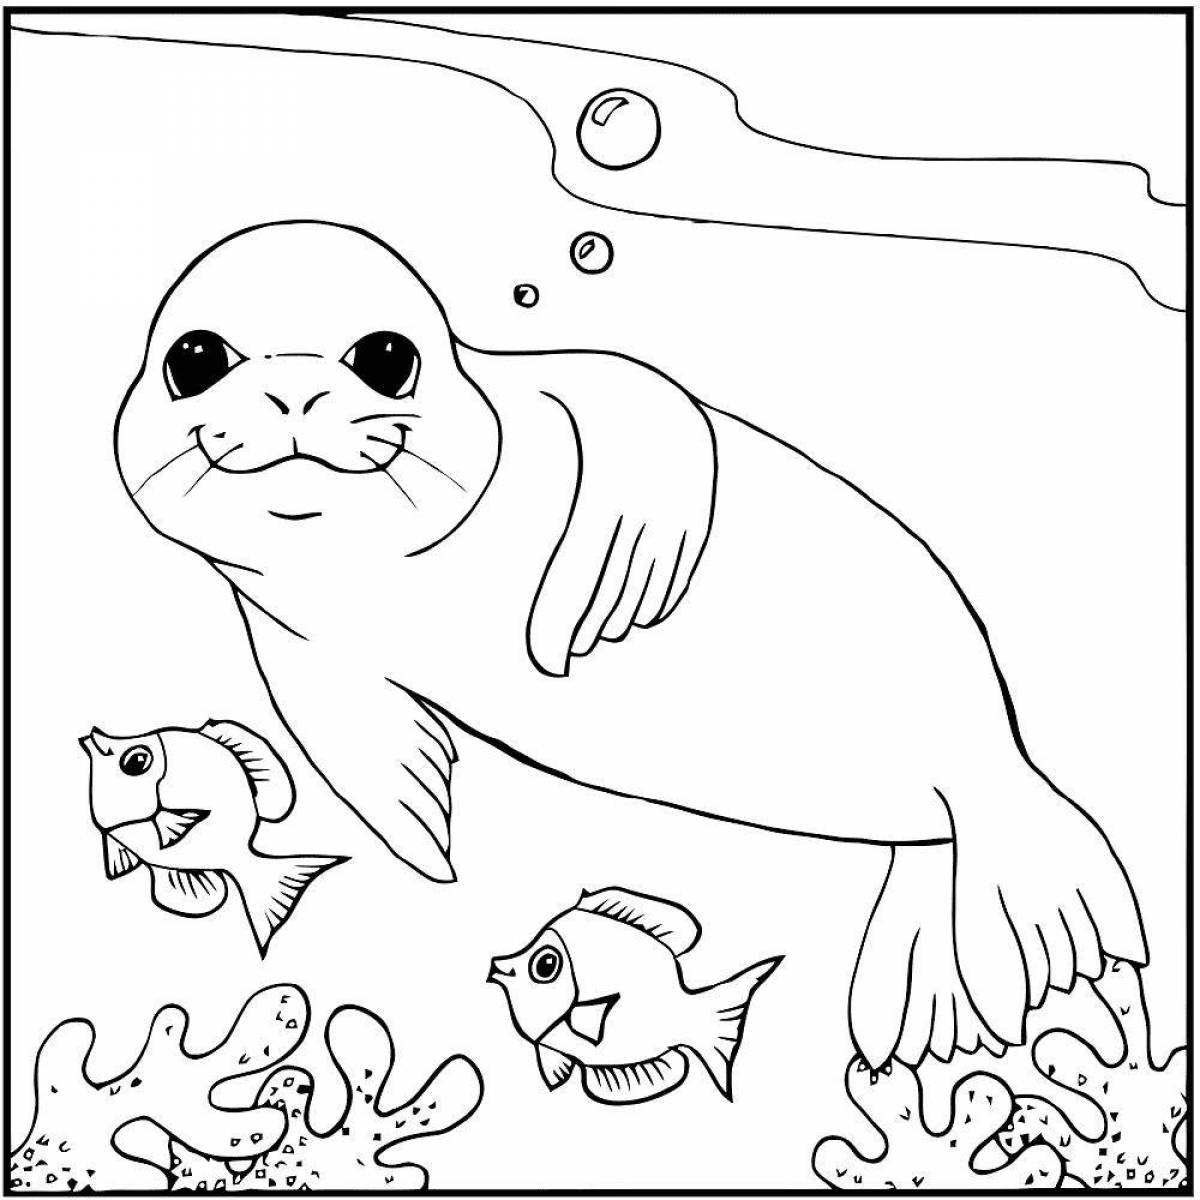 Adorable fur seal coloring for kids